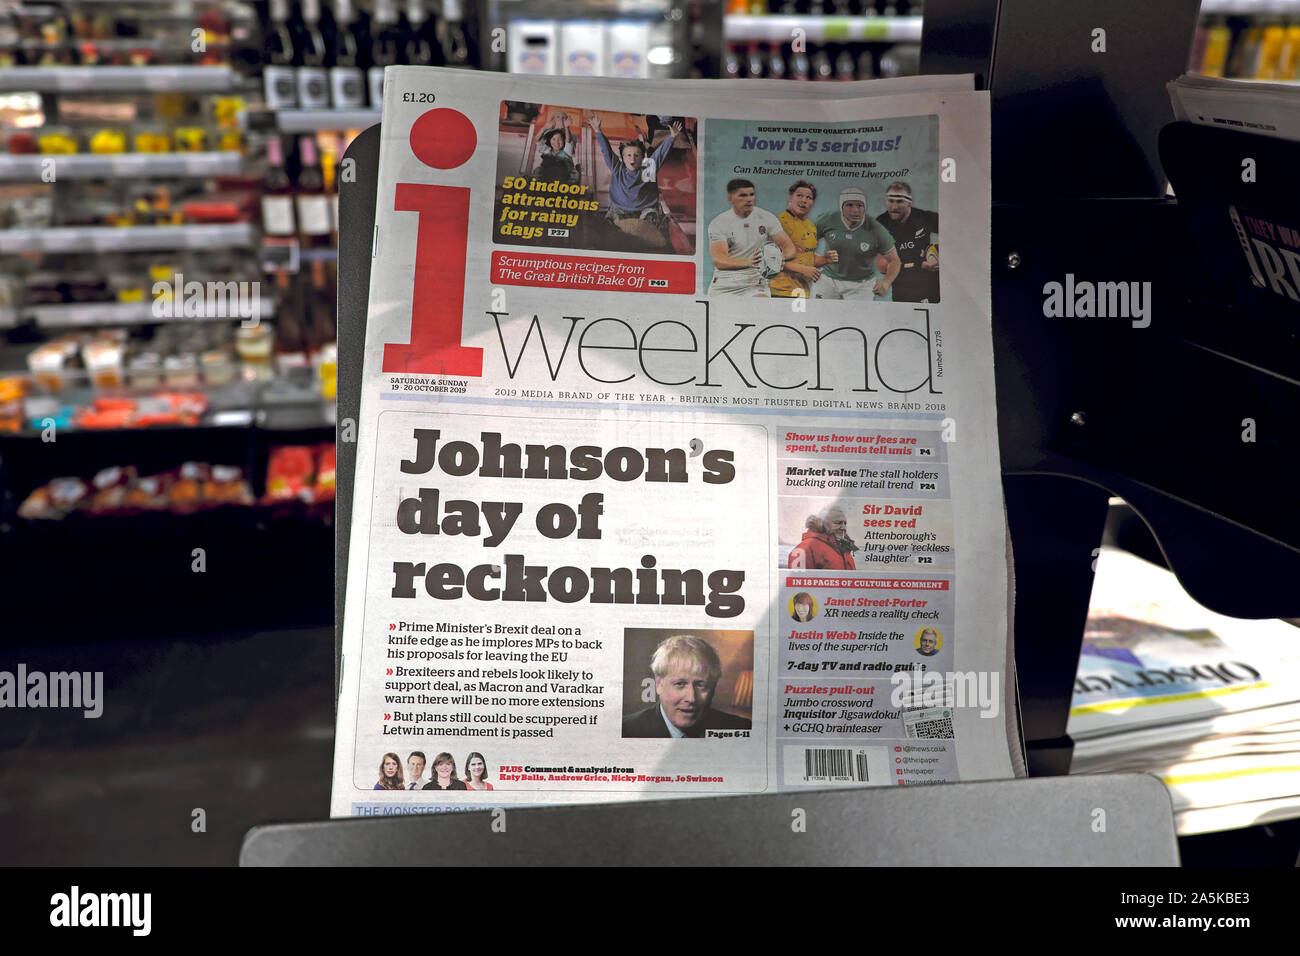 Boris 'Johnson;s day of reckoning' i newspaper front page Brexit headline on a supermarket shelf newsstand 20 October 2019 in London England UK Stock Photo